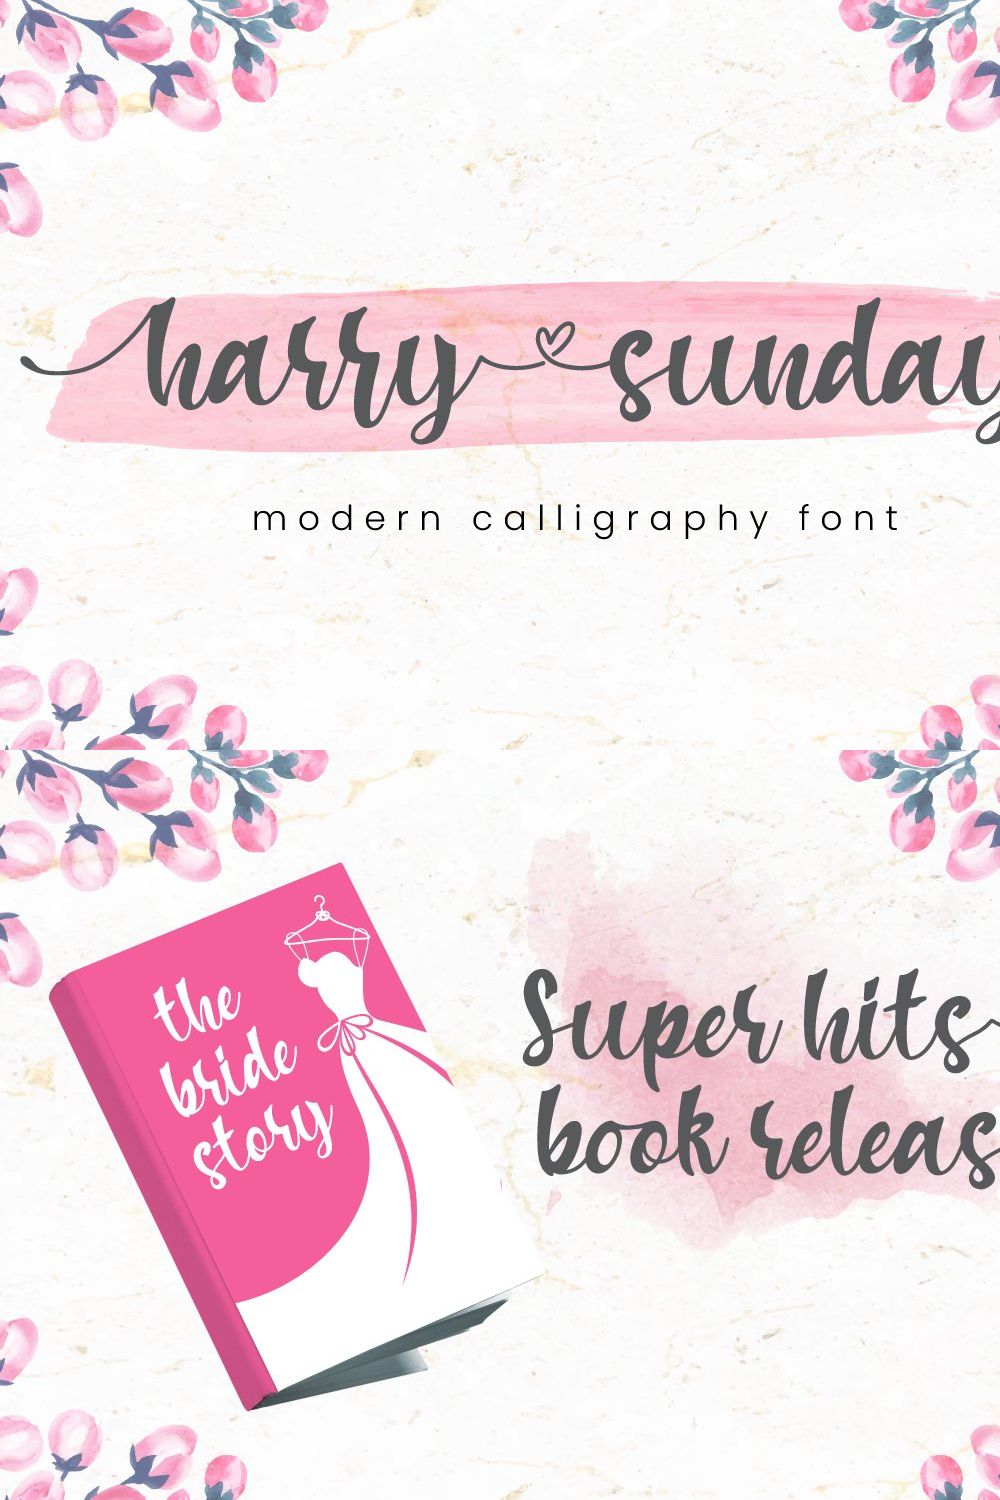 harry sunday pinterest preview image.